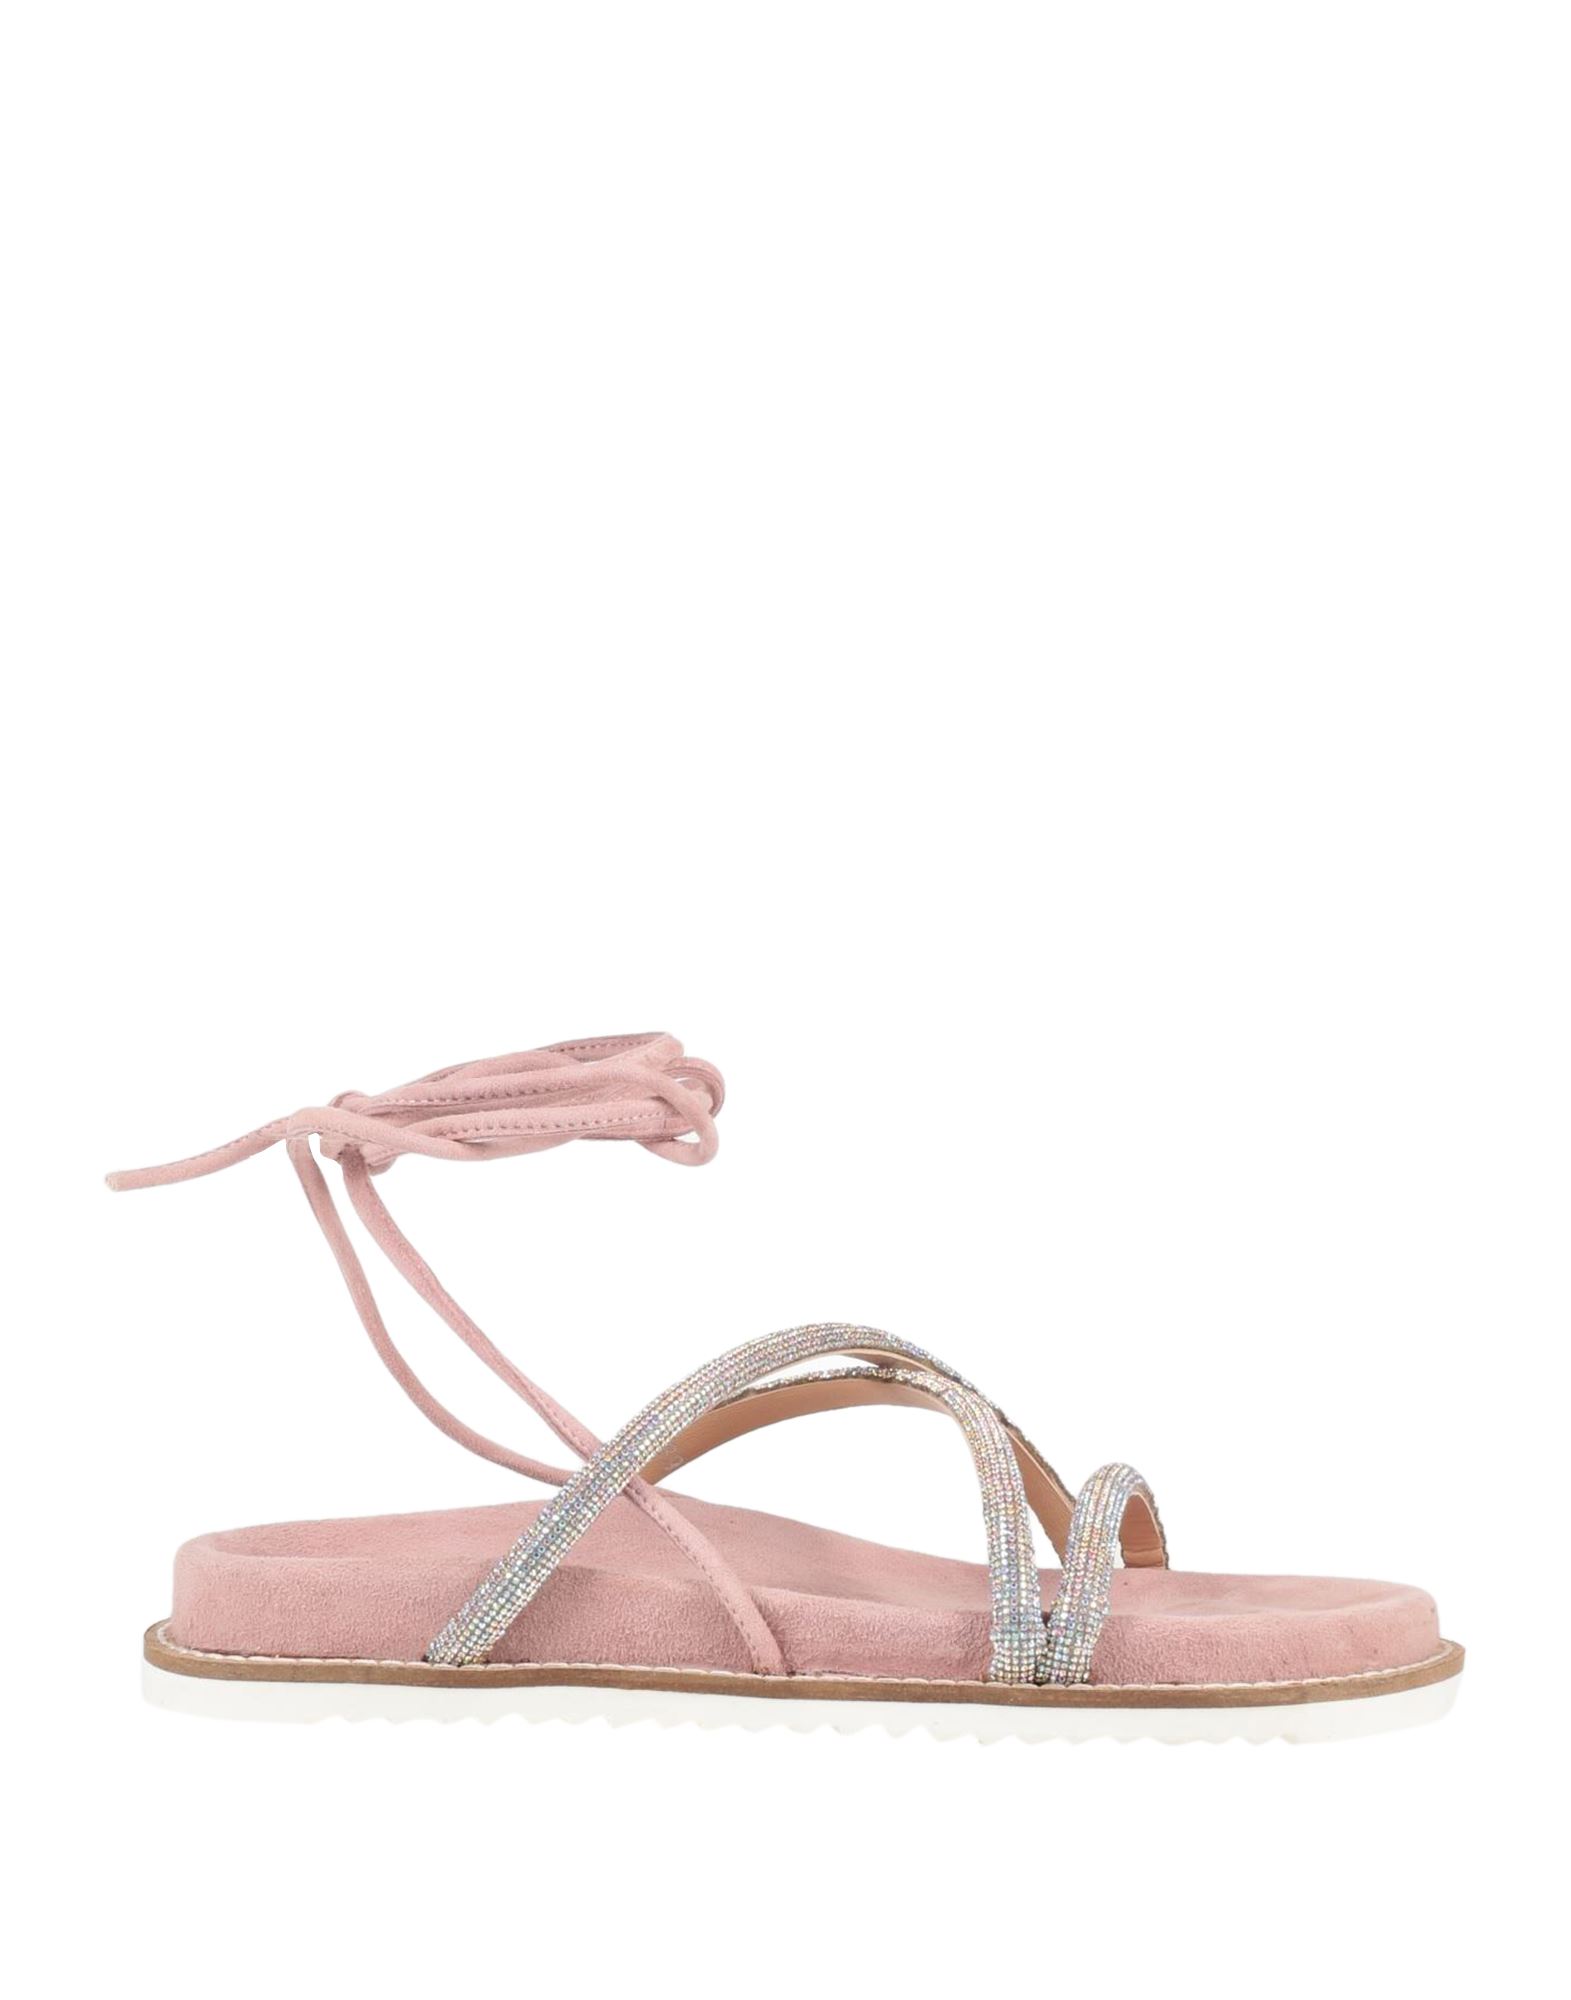 Cb Fusion Sandals In Rose Gold